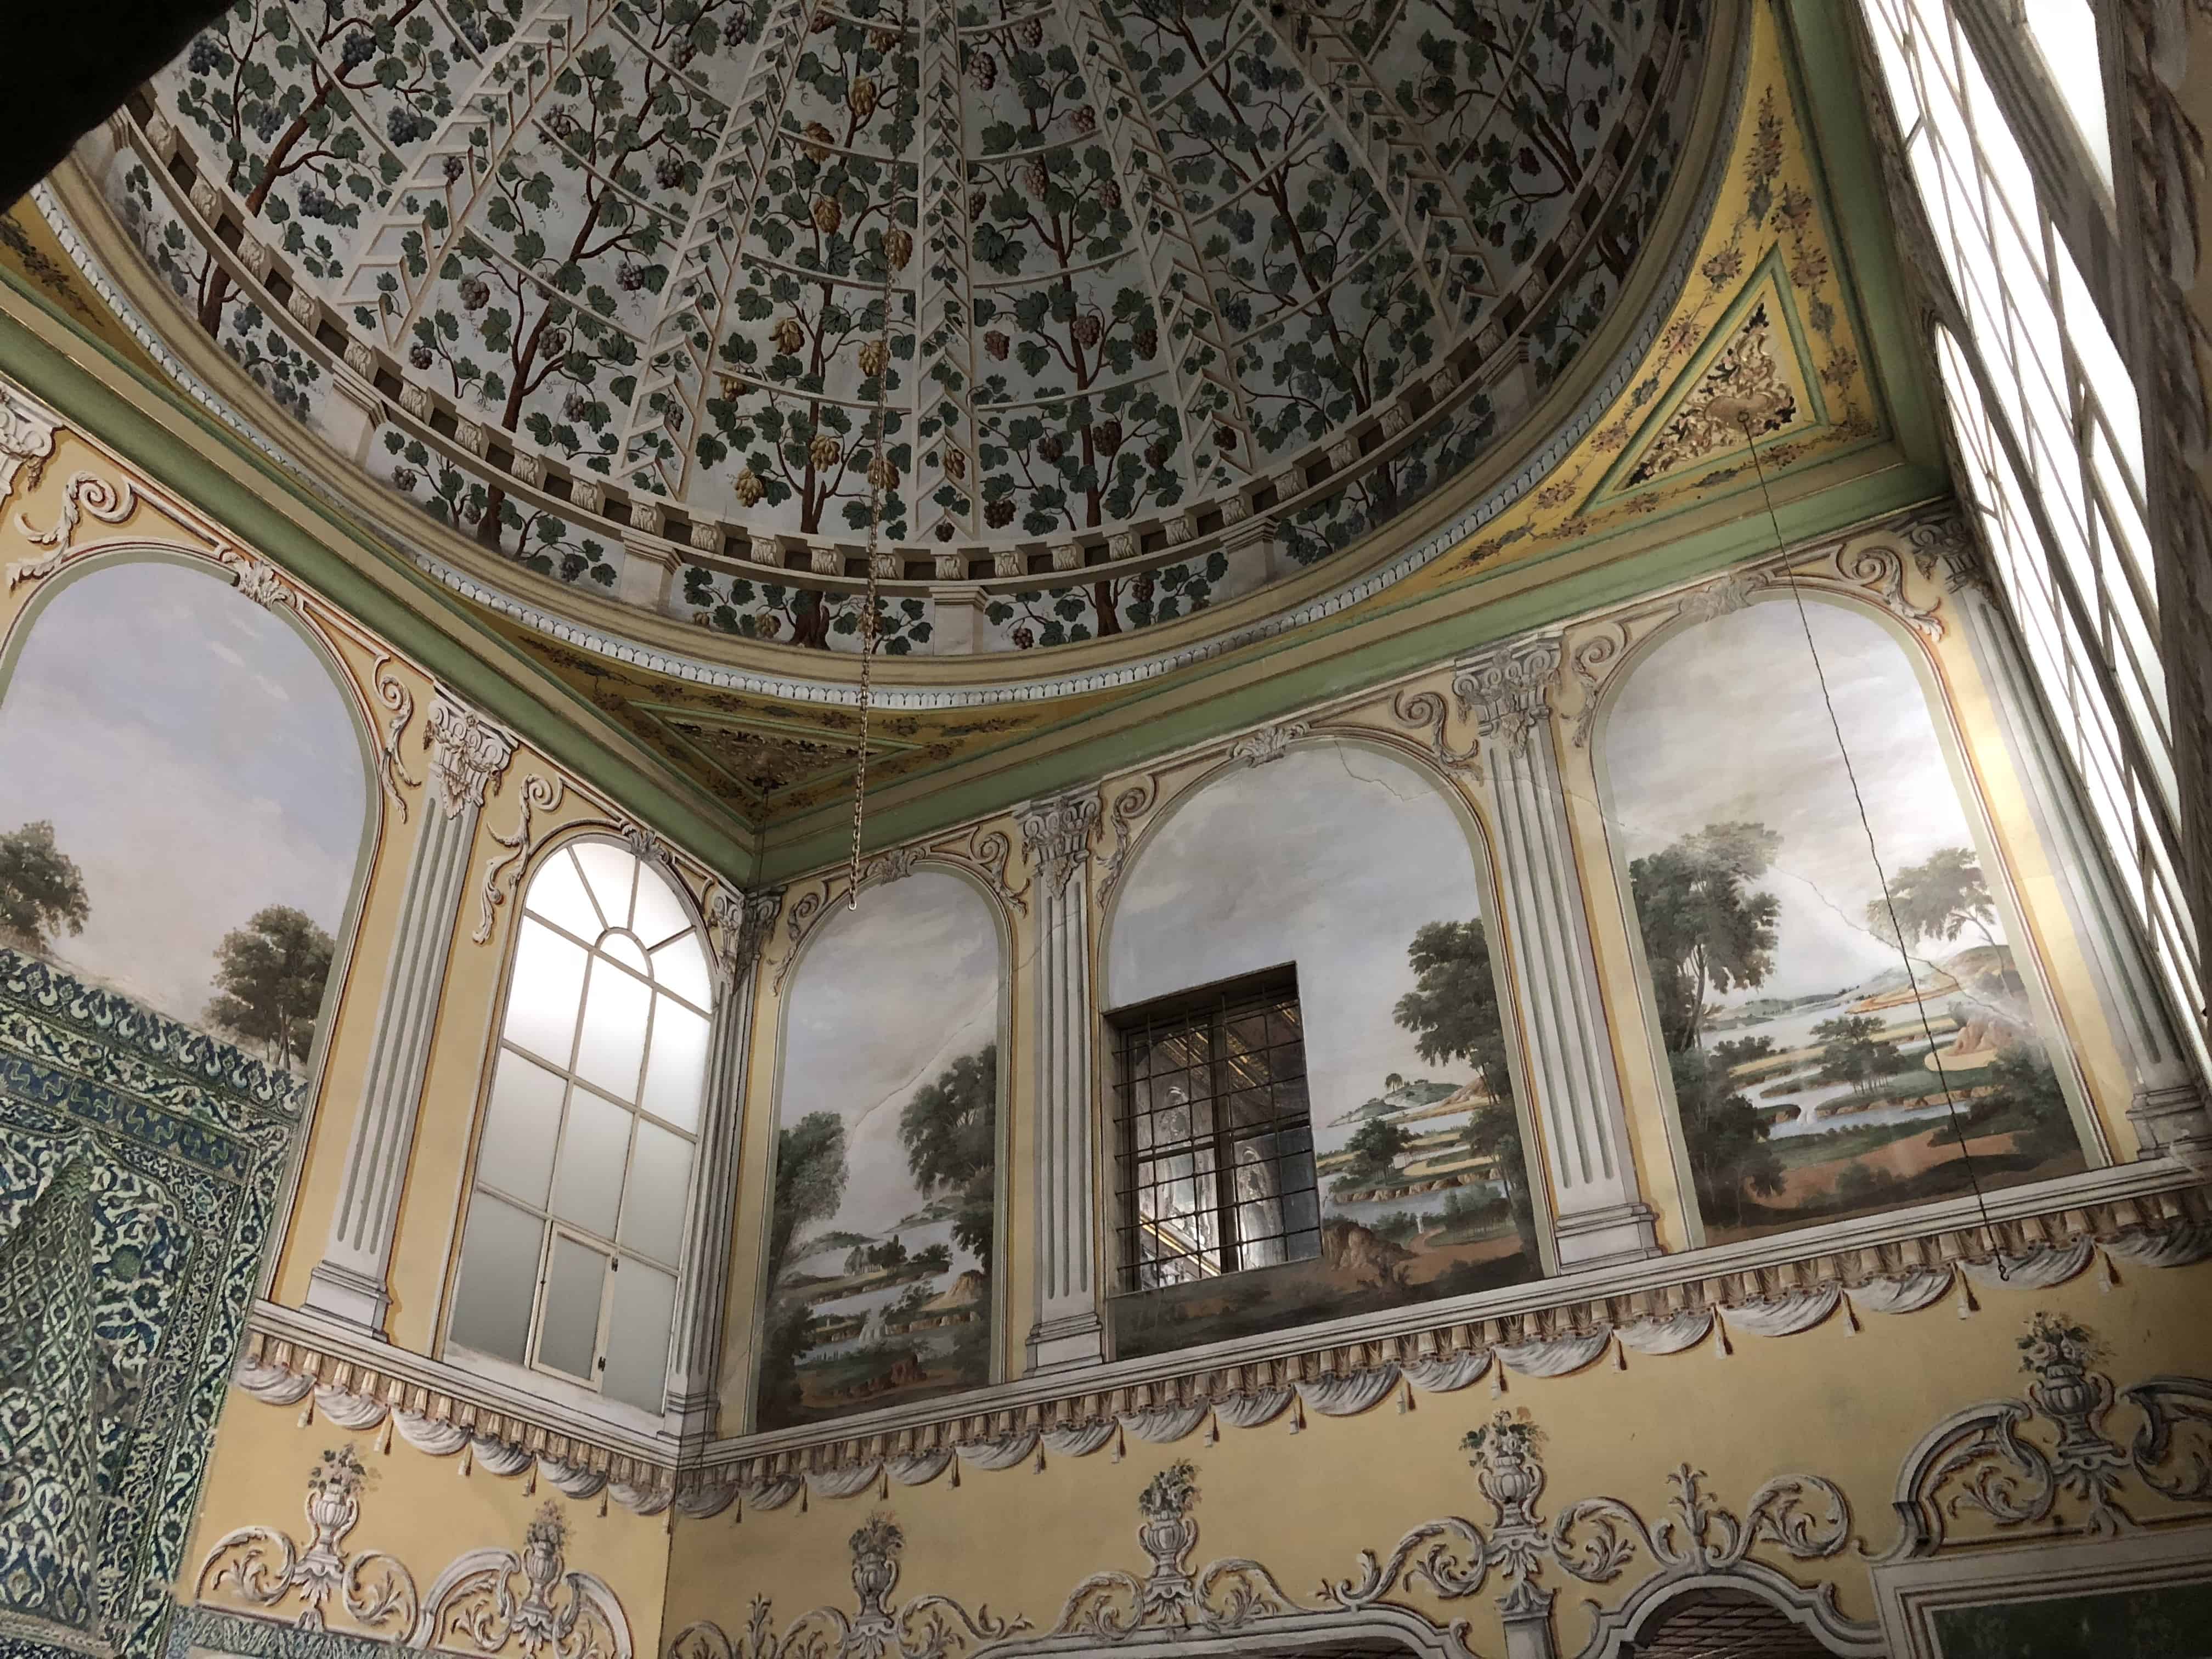 Frescoes in the Apartments of the Queen Mother in the Imperial Harem at Topkapi Palace in Istanbul, Turkey